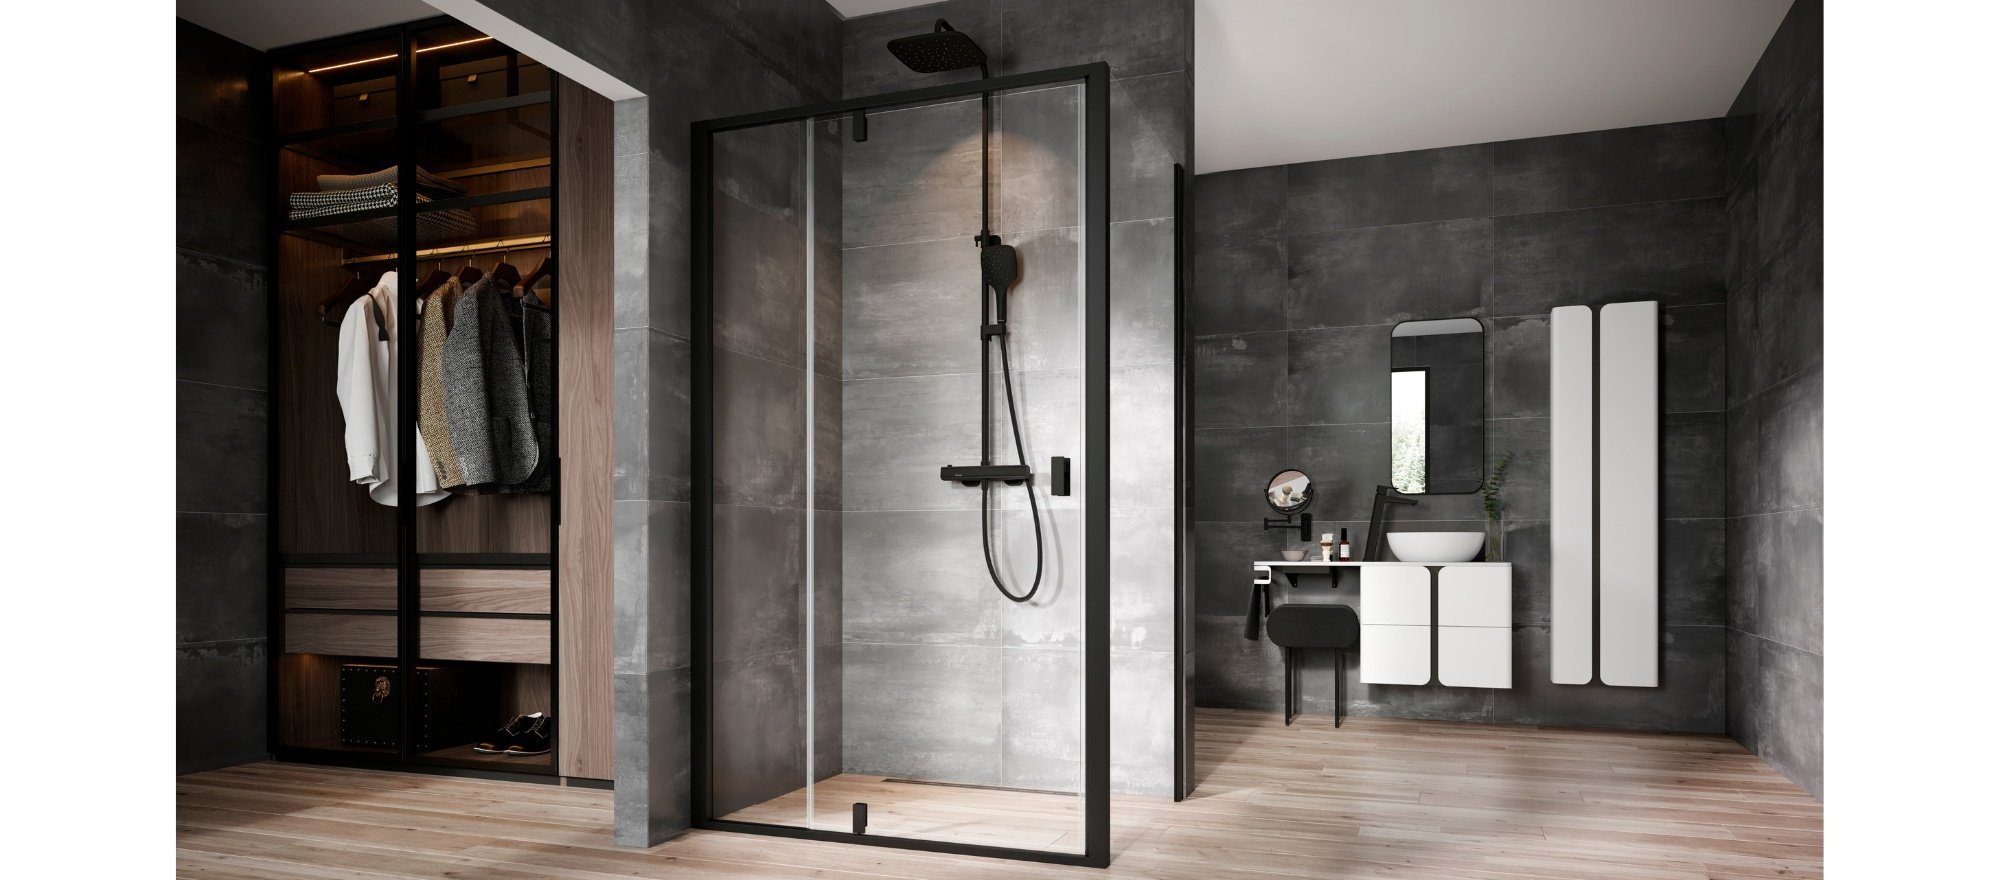 You can rely on our shower enclosures